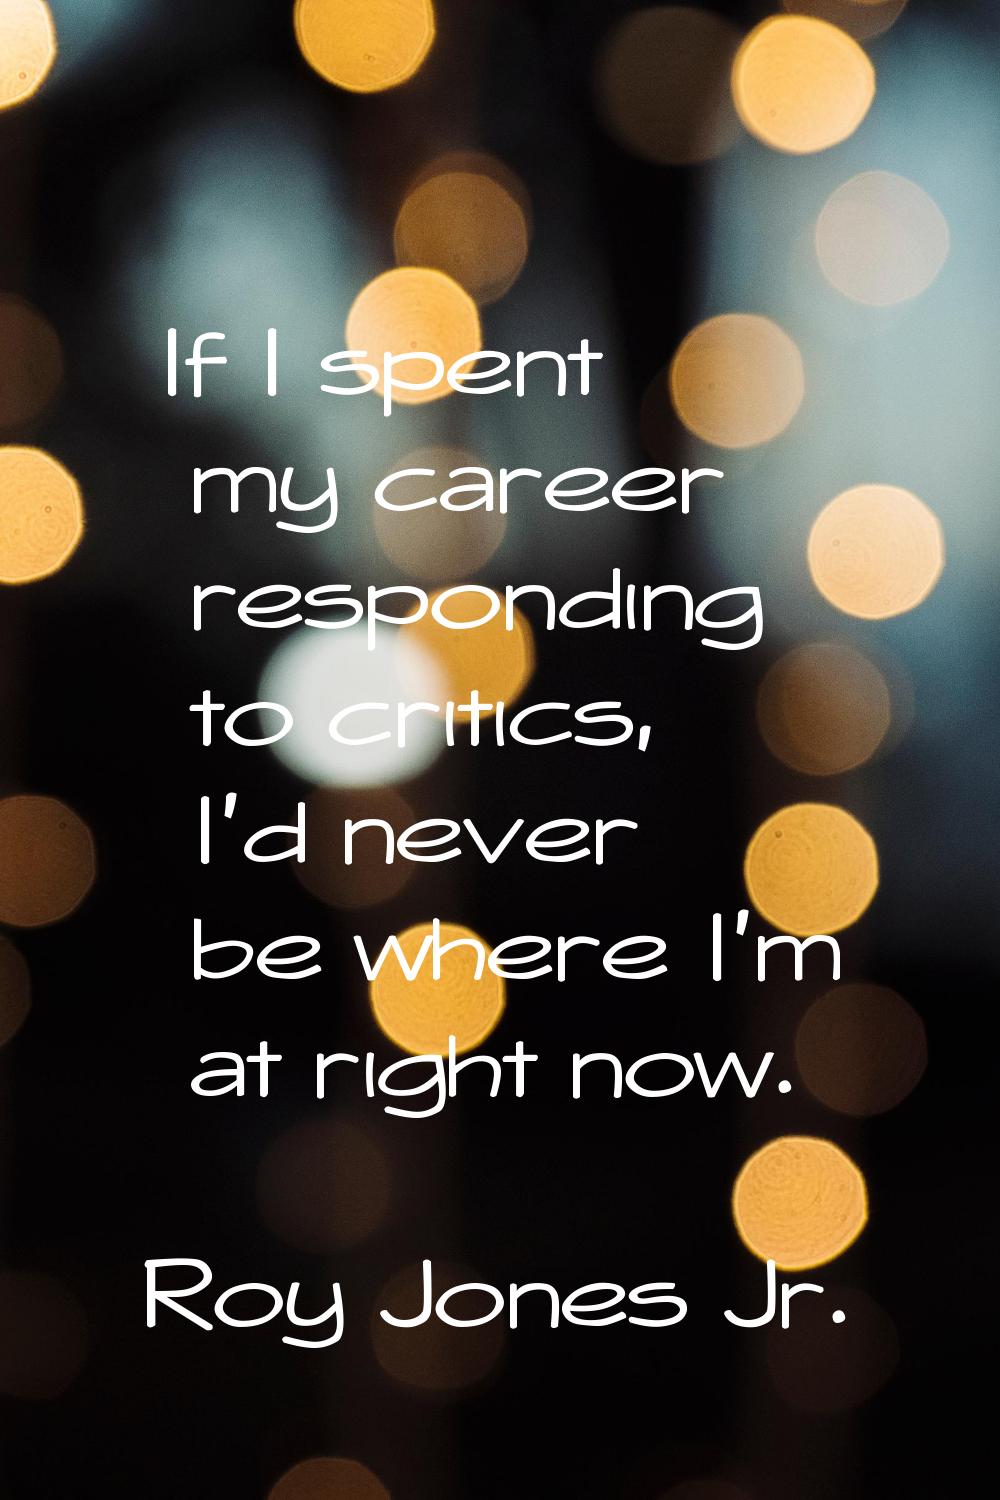 If I spent my career responding to critics, I'd never be where I'm at right now.